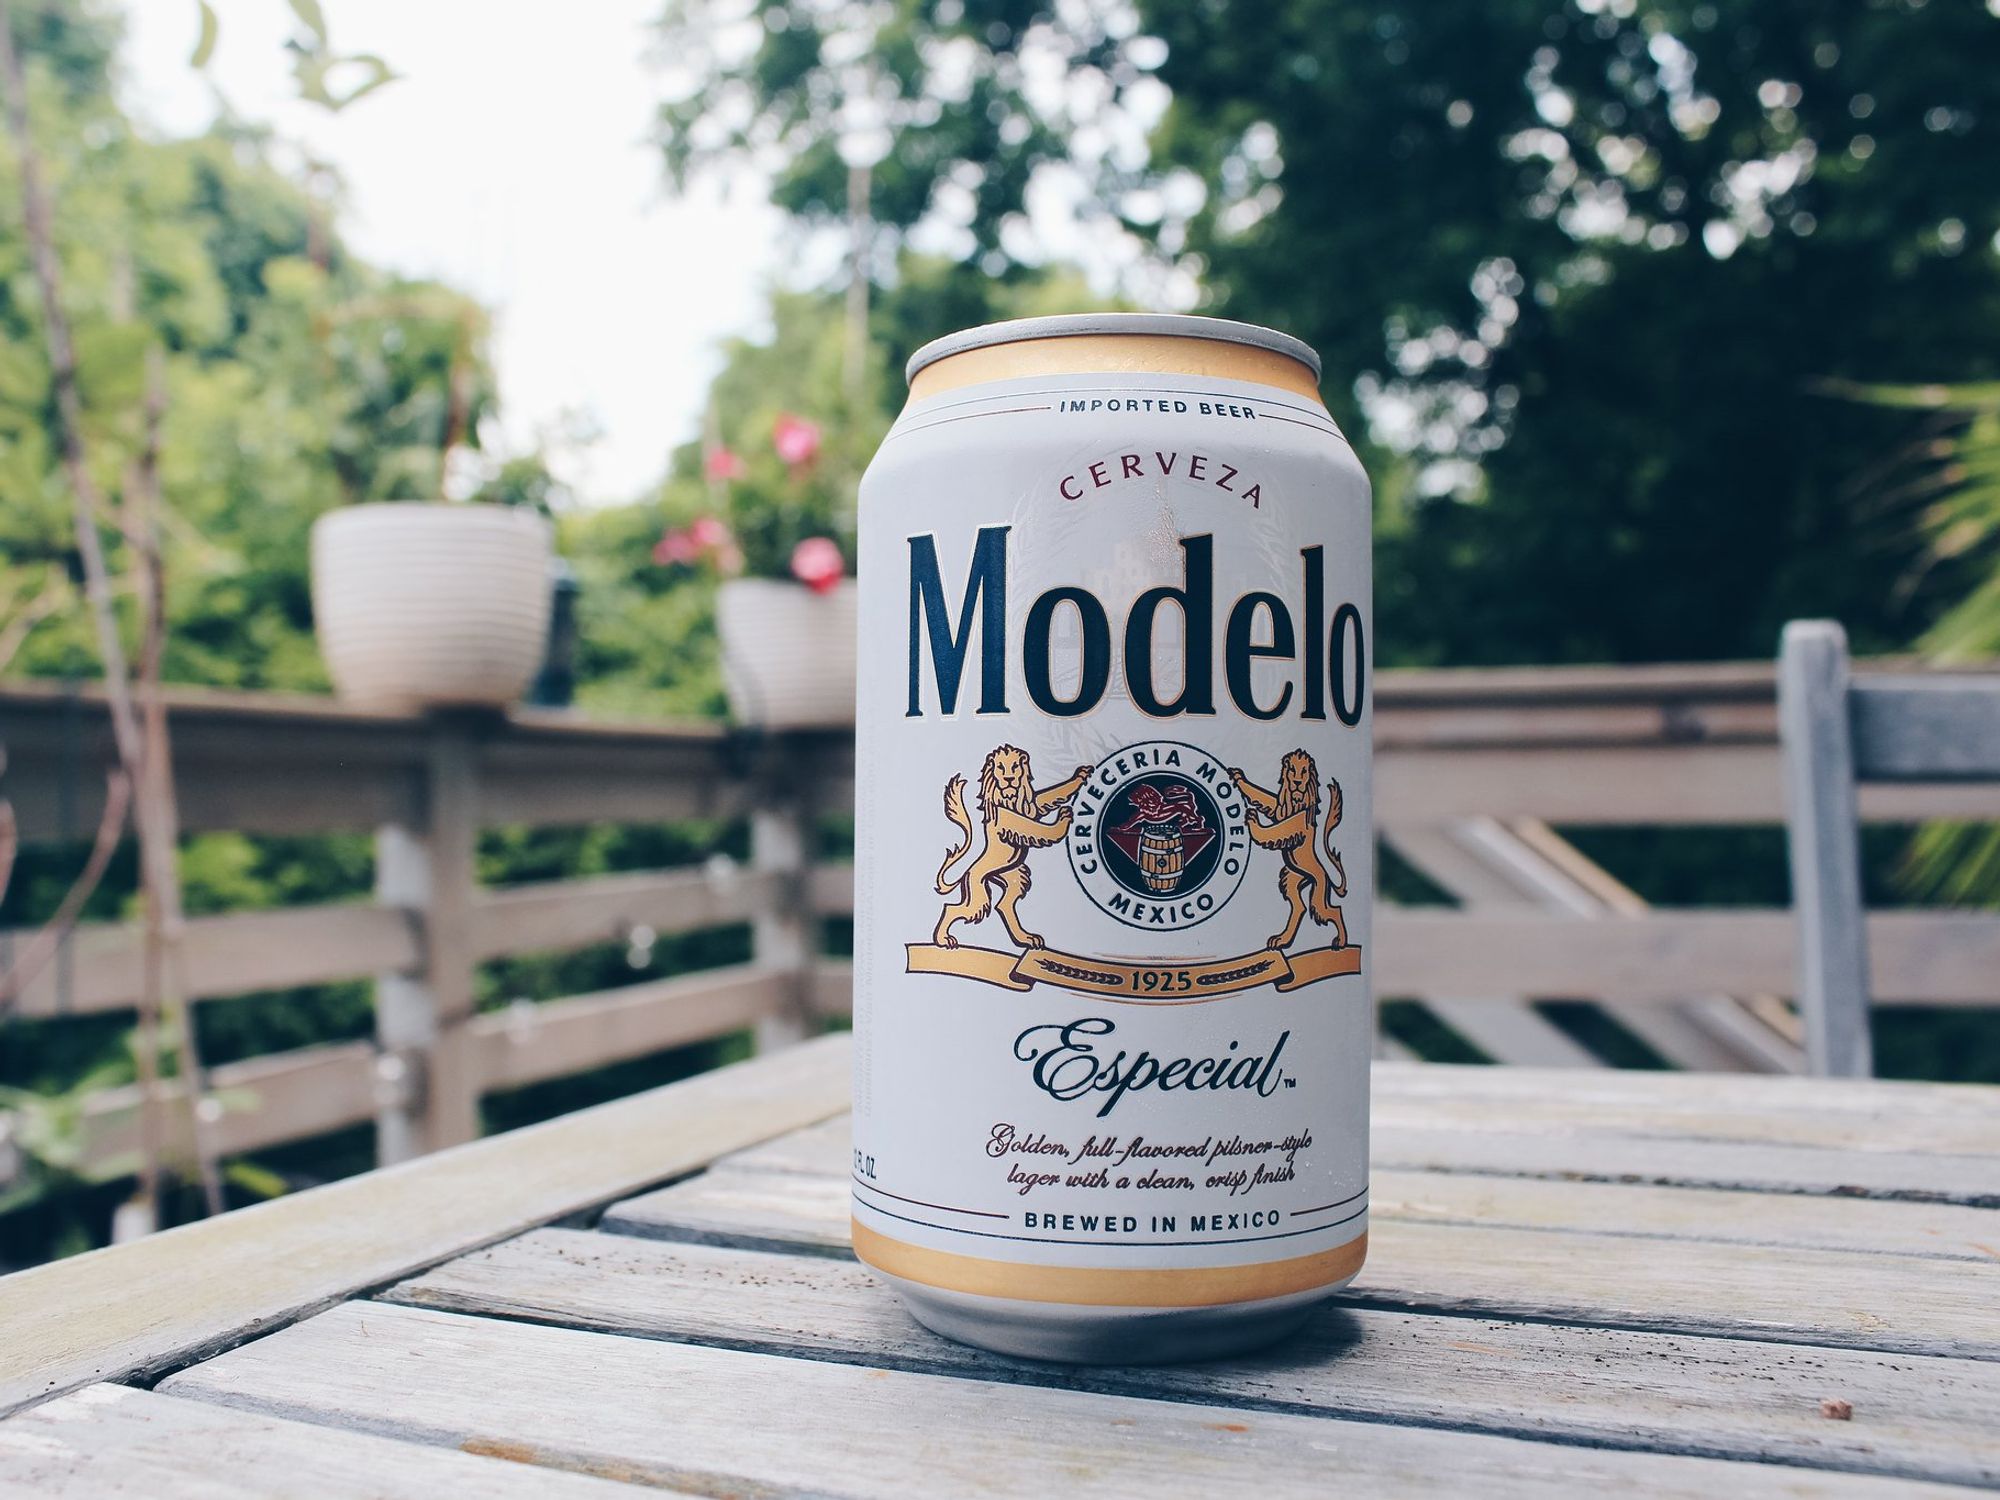 Modelo Especial Mexican beer, on a rustic wooden table in an outdoor setting